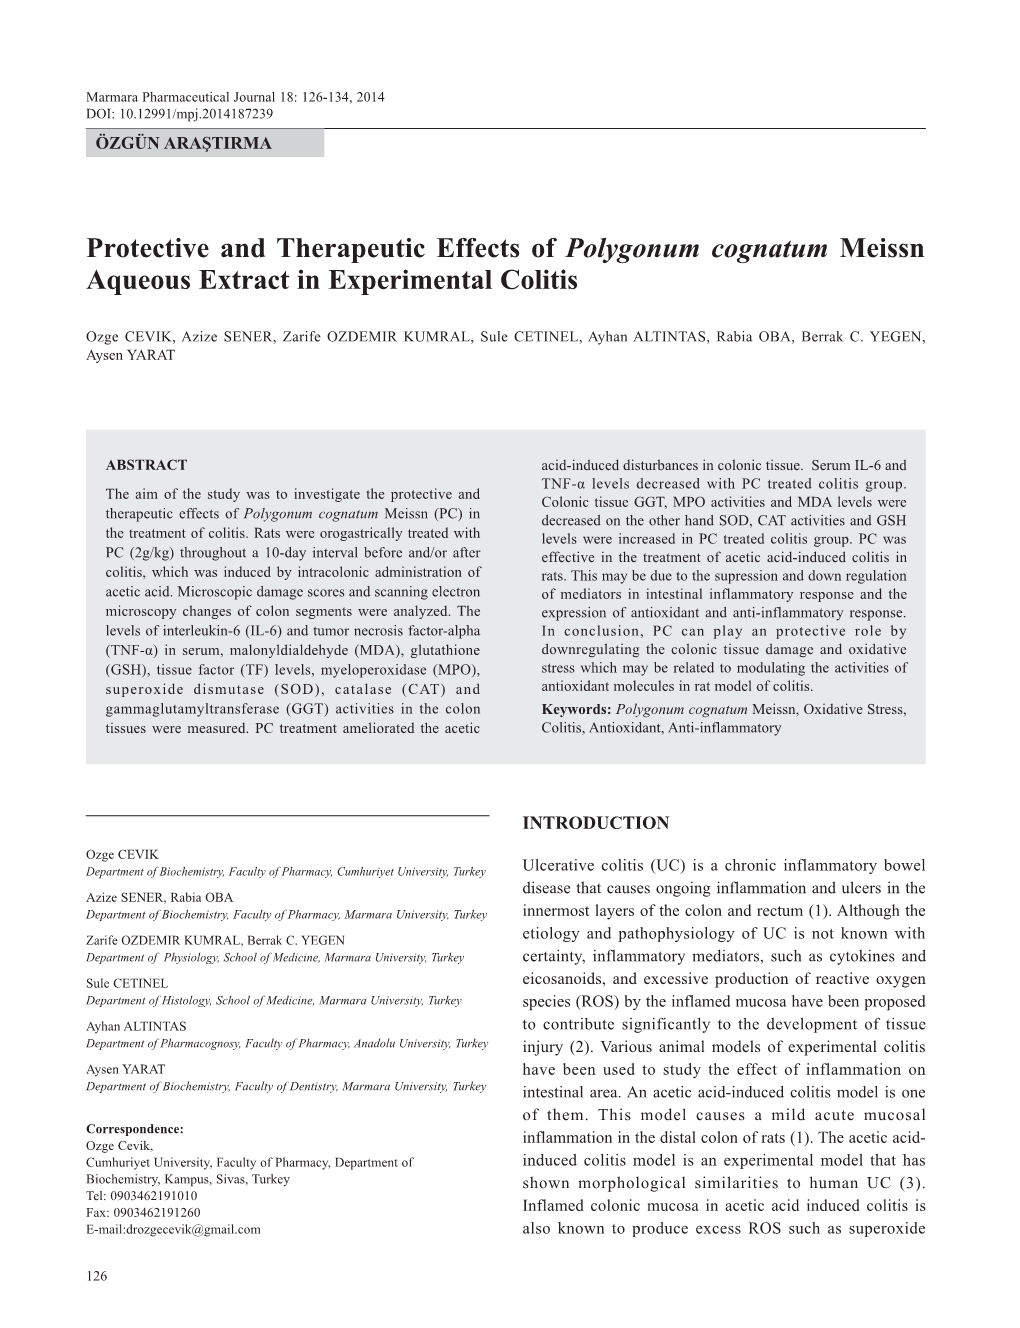 Protective and Therapeutic Effects of Polygonum Cognatum Meissn Aqueous Extract in Experimental Colitis